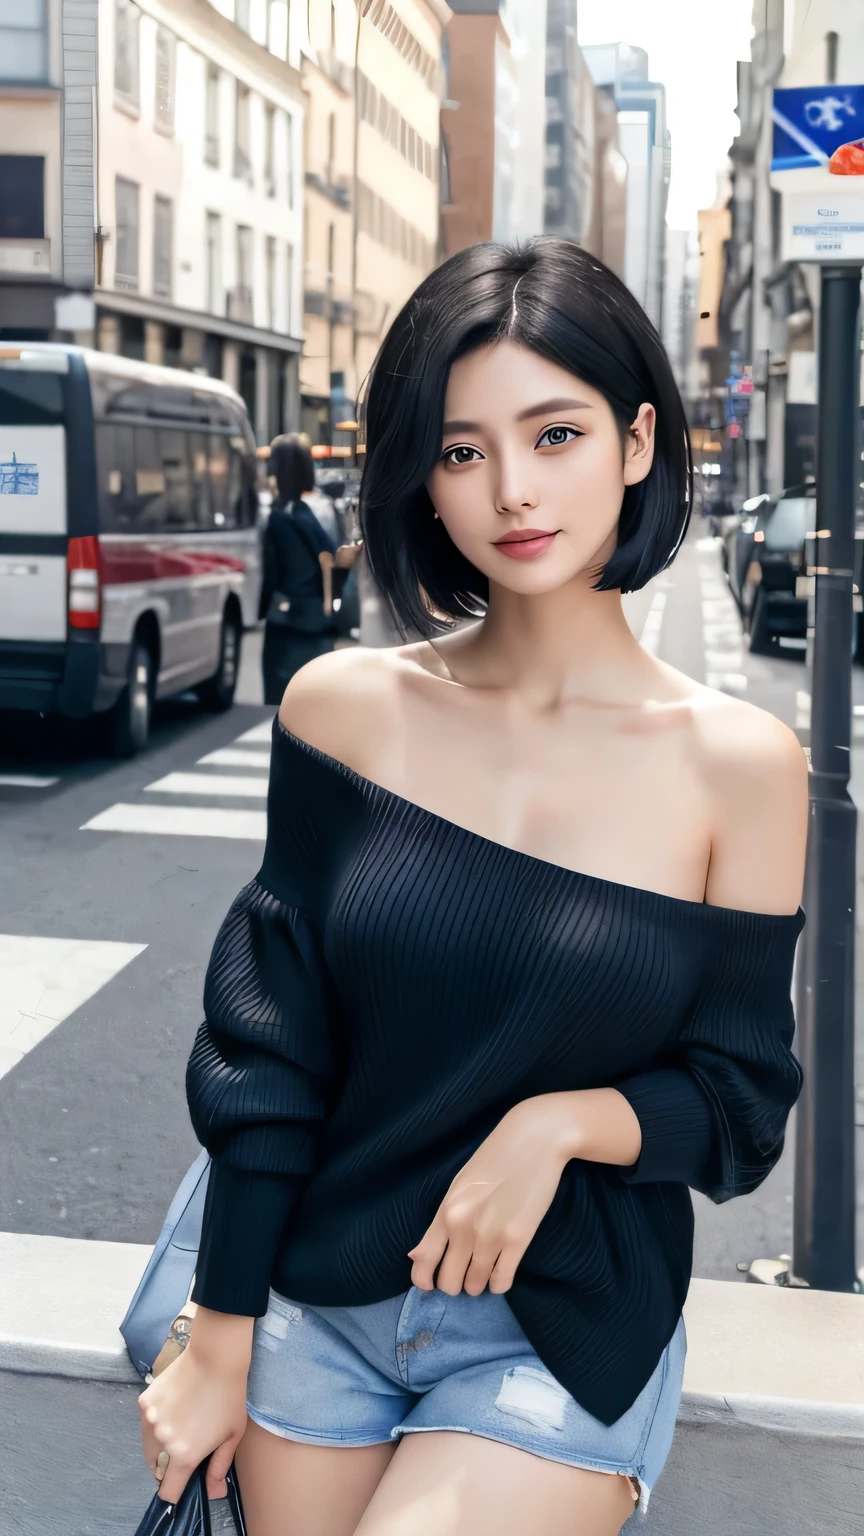 Non-NSFW、Realistic、Highest quality、Highest quality、masterpiece、Ultra-high resolution、RAW Photos、Realistic、Bright lighting、Face Light、Smooth Professional Lighting、Looking into the camera、alone、Adult female、Beautiful woman、Super Beauty、Realistic肌、Moisturized Skin、Realistic eyes and faces、Perfect model body shape、Beautiful Eyes、Big eyes、Inconspicuous tear bags、slim、No bra、Beautiful fingers、Very short hair、Jet Black Hair、Iris、Looks happy、(Both ears are hidden by hair), (Long thigh-length knit shirt:1.3),(Off-shoulder:1.1),In the city, Small Ass, (Large Breasts:1.1),(Venus&#39; Nipples:1.2), A konigsreuter、Sexy Random Poses,(standing:1.1),(from behind:1.6)